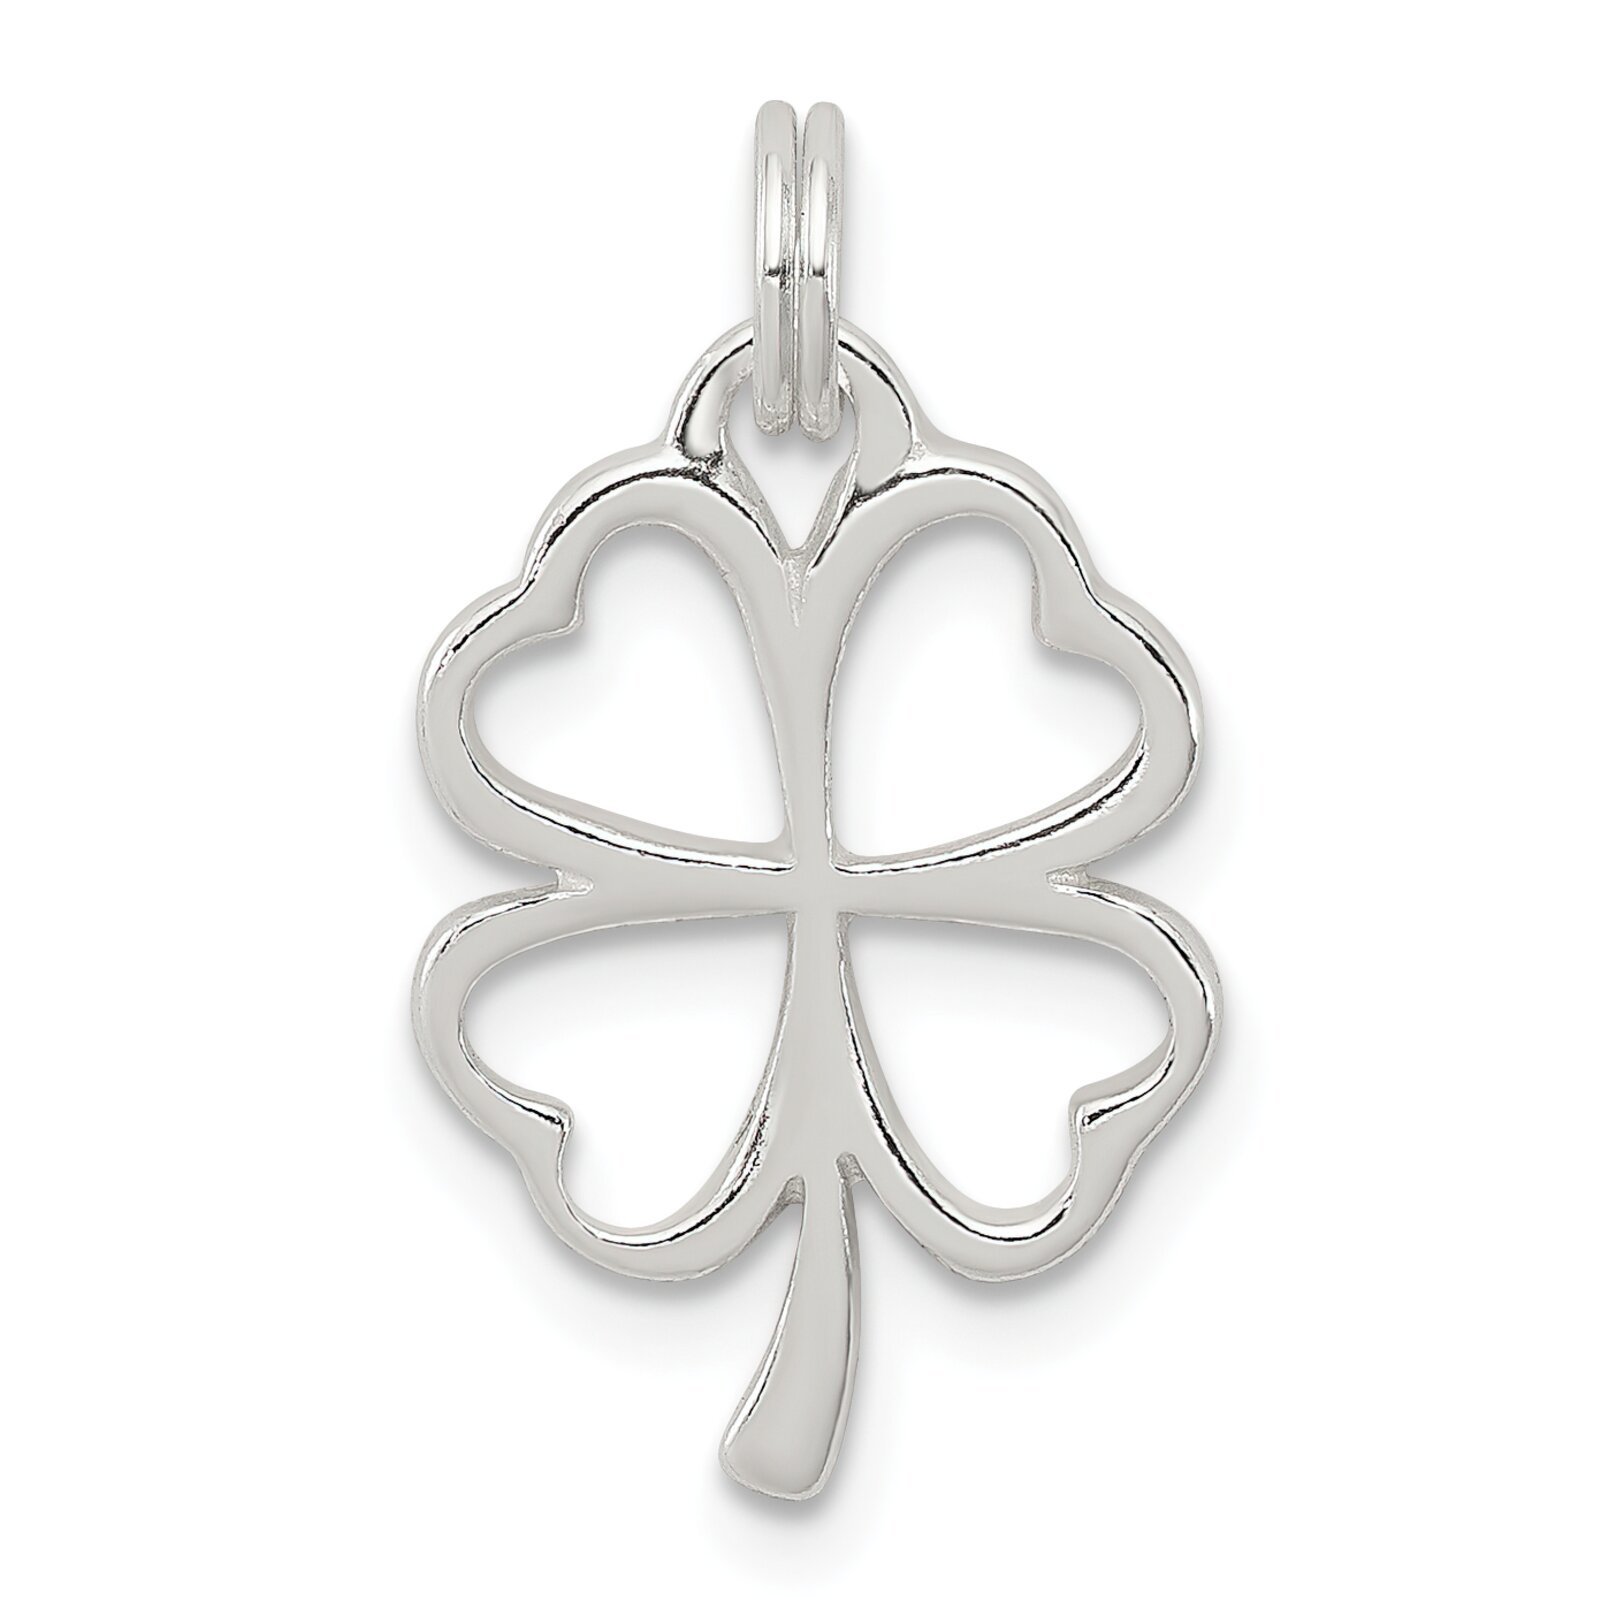 Primary image for Sterling Silver Four Leaf Clover Charm Pendant Jewelry 20mm x 12mm